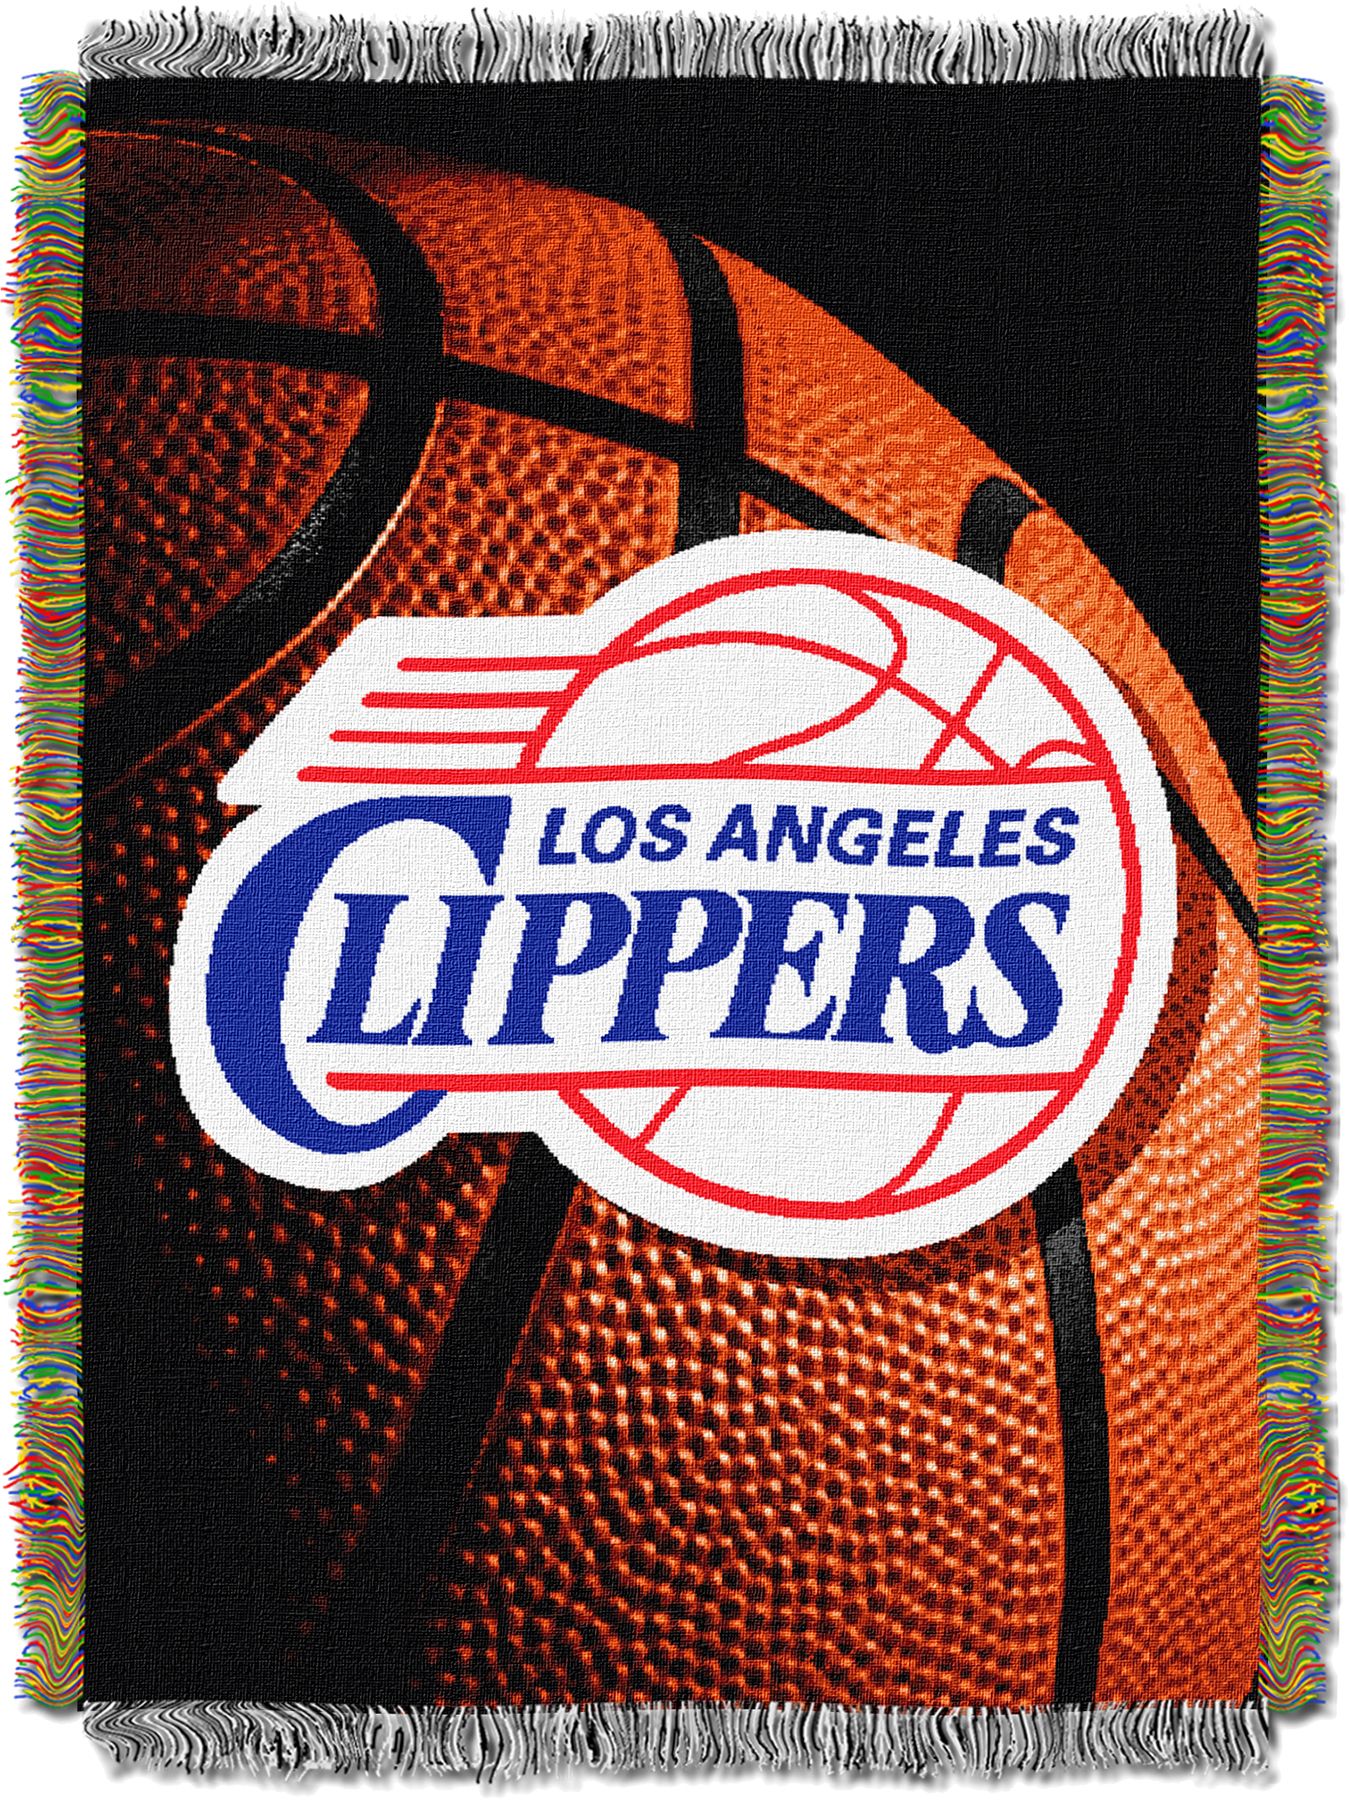 TheNorthwest Los Angeles Clippers 48'' x 60'' Photo Real Throw Blanket